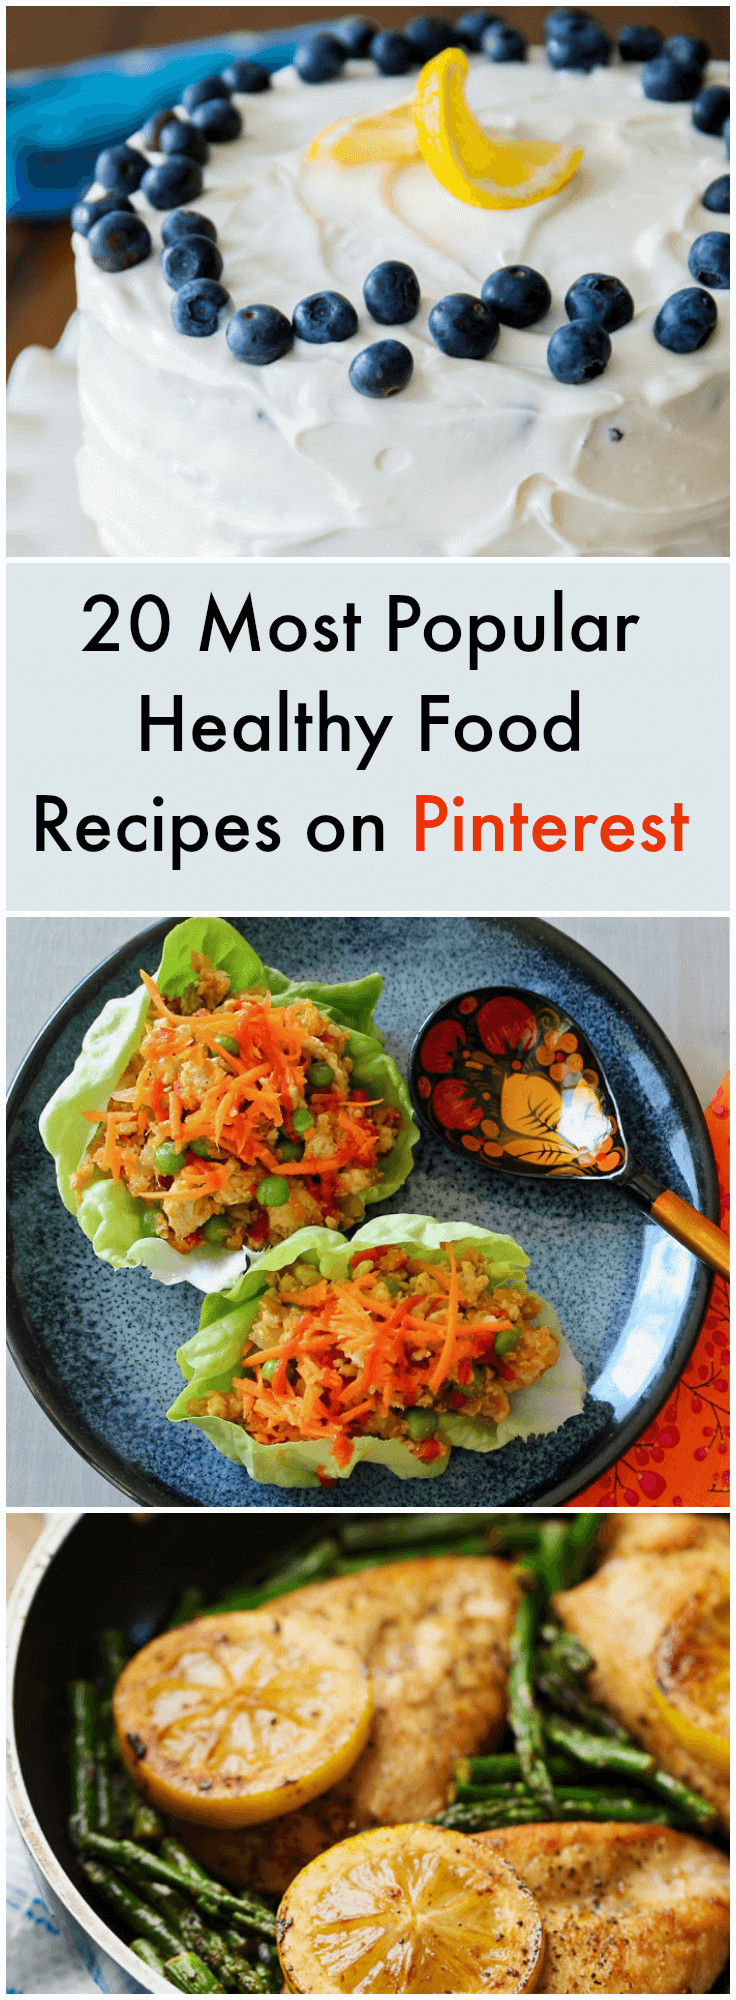 Most Healthy Snacks
 20 Most Popular Healthy Food Recipes on Pinterest